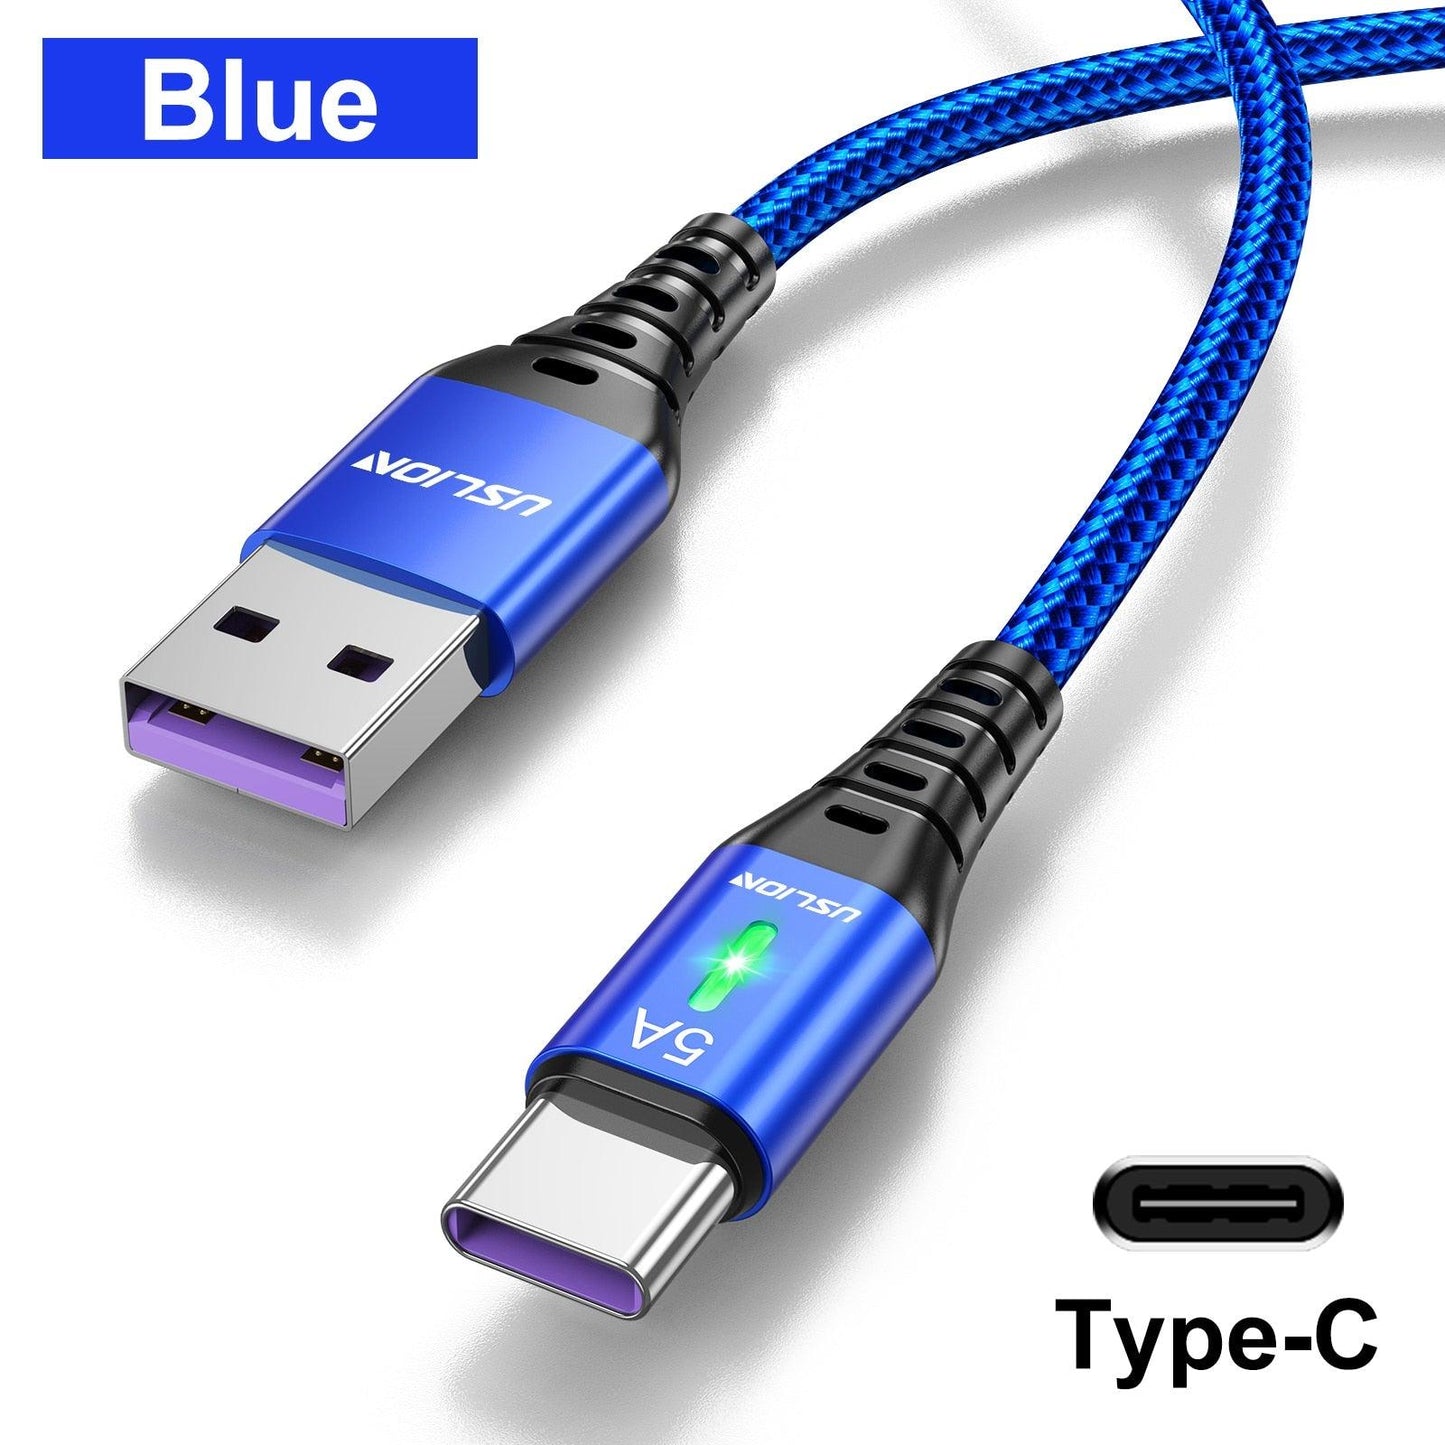 USLION 5A USB Type C Cable Mobile Phone Fast Charging Data Cord For Samsung S22 Xiaomi 12 Pro Poco F3 X4 GT Oneplus 10 Realme 3M